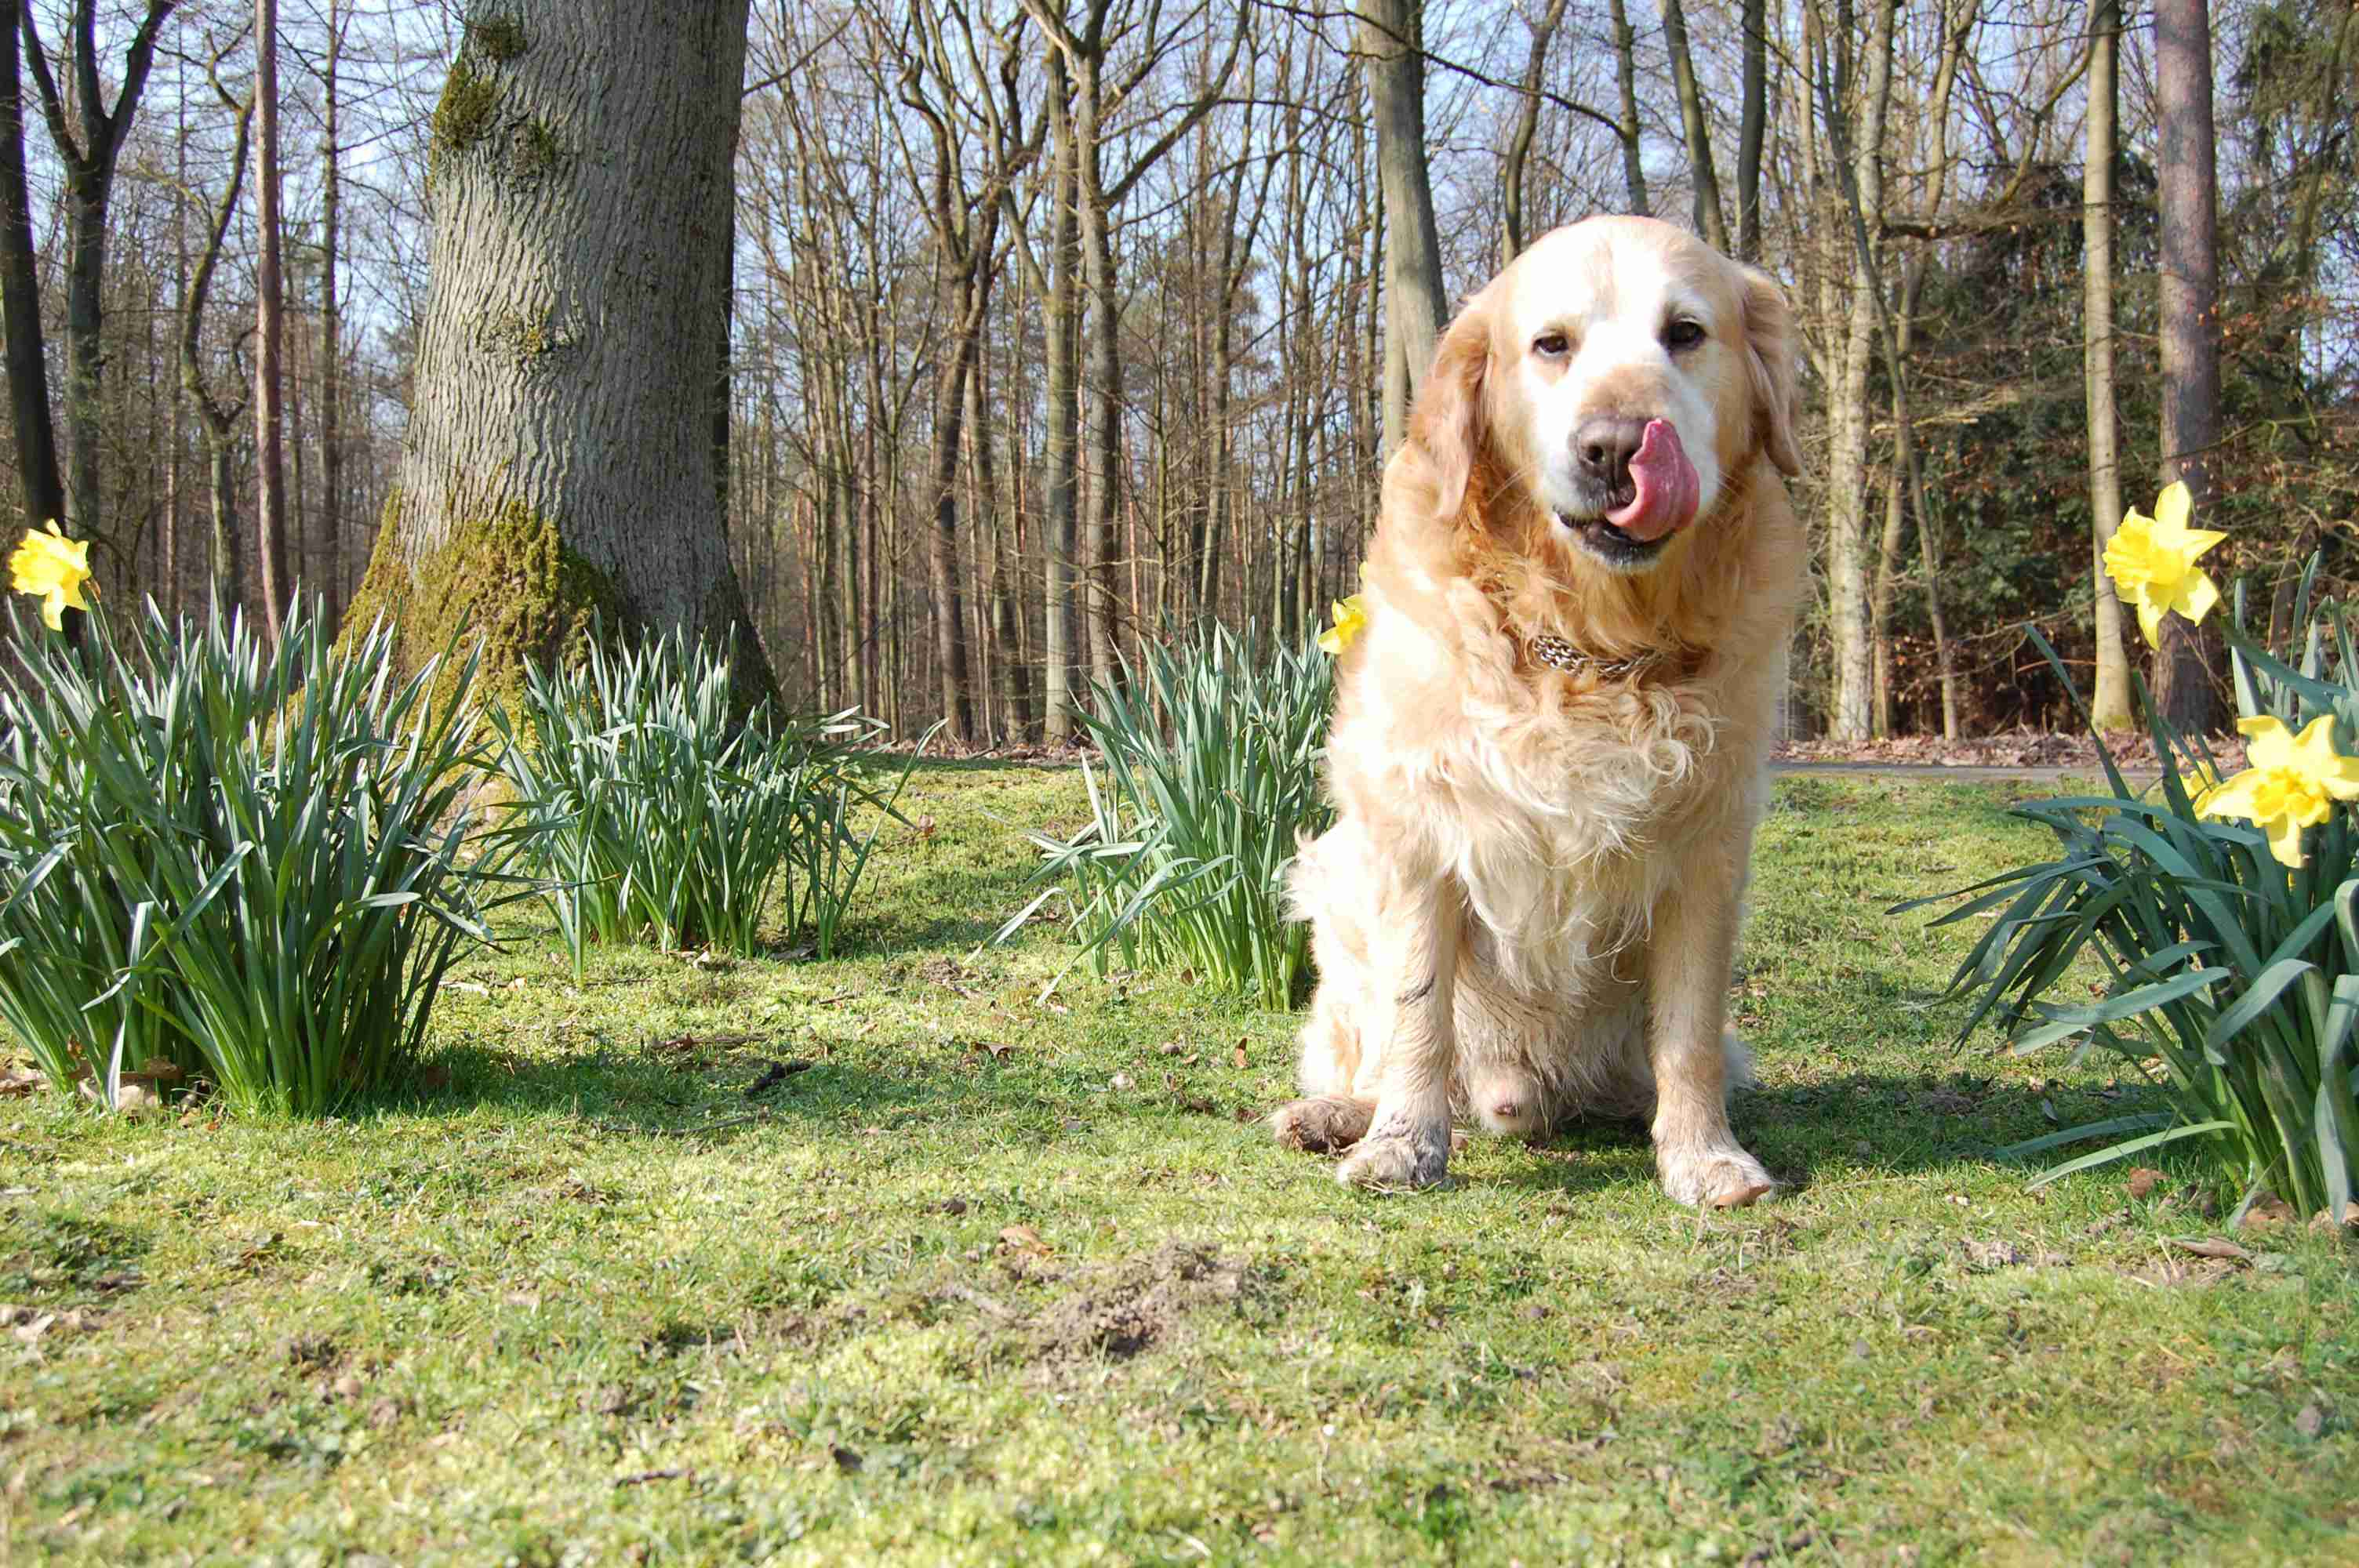 Can Golden Retrievers be prone to obesity?